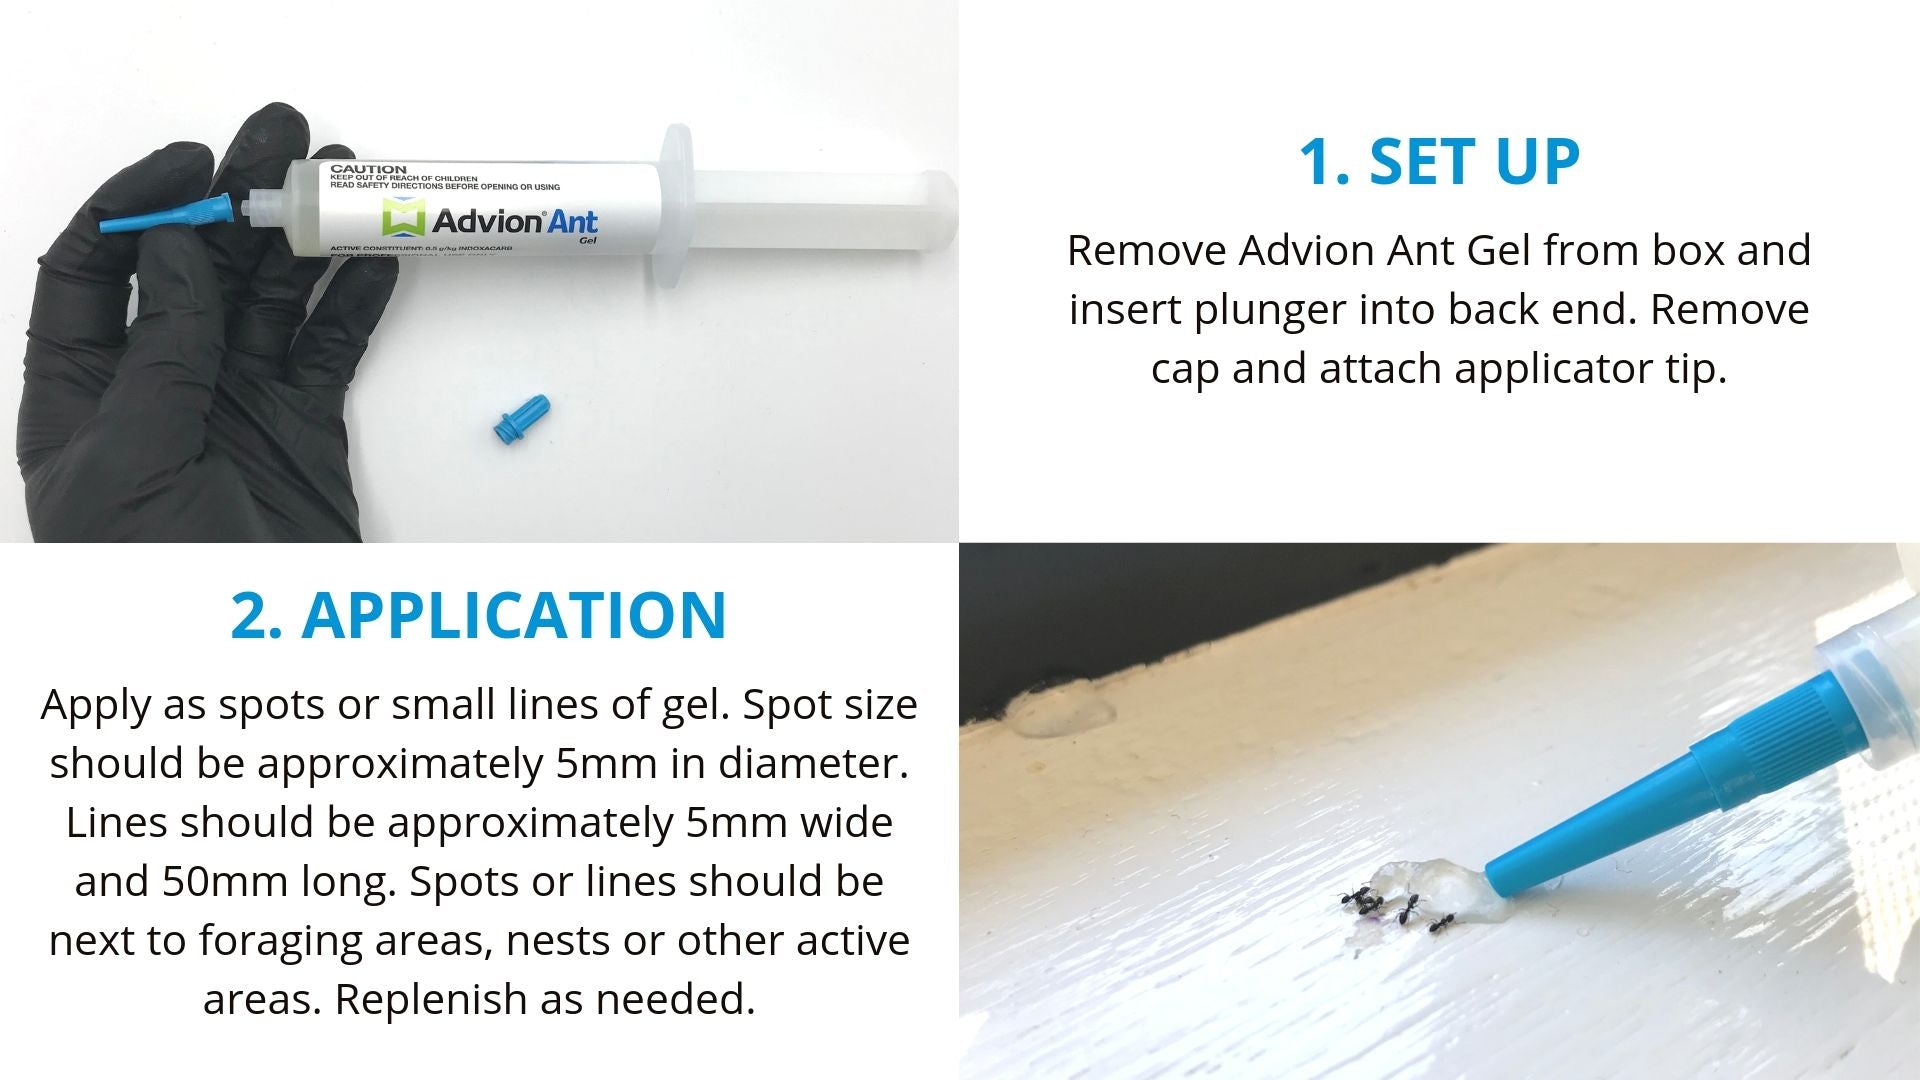 How to use Advion Ant Gel